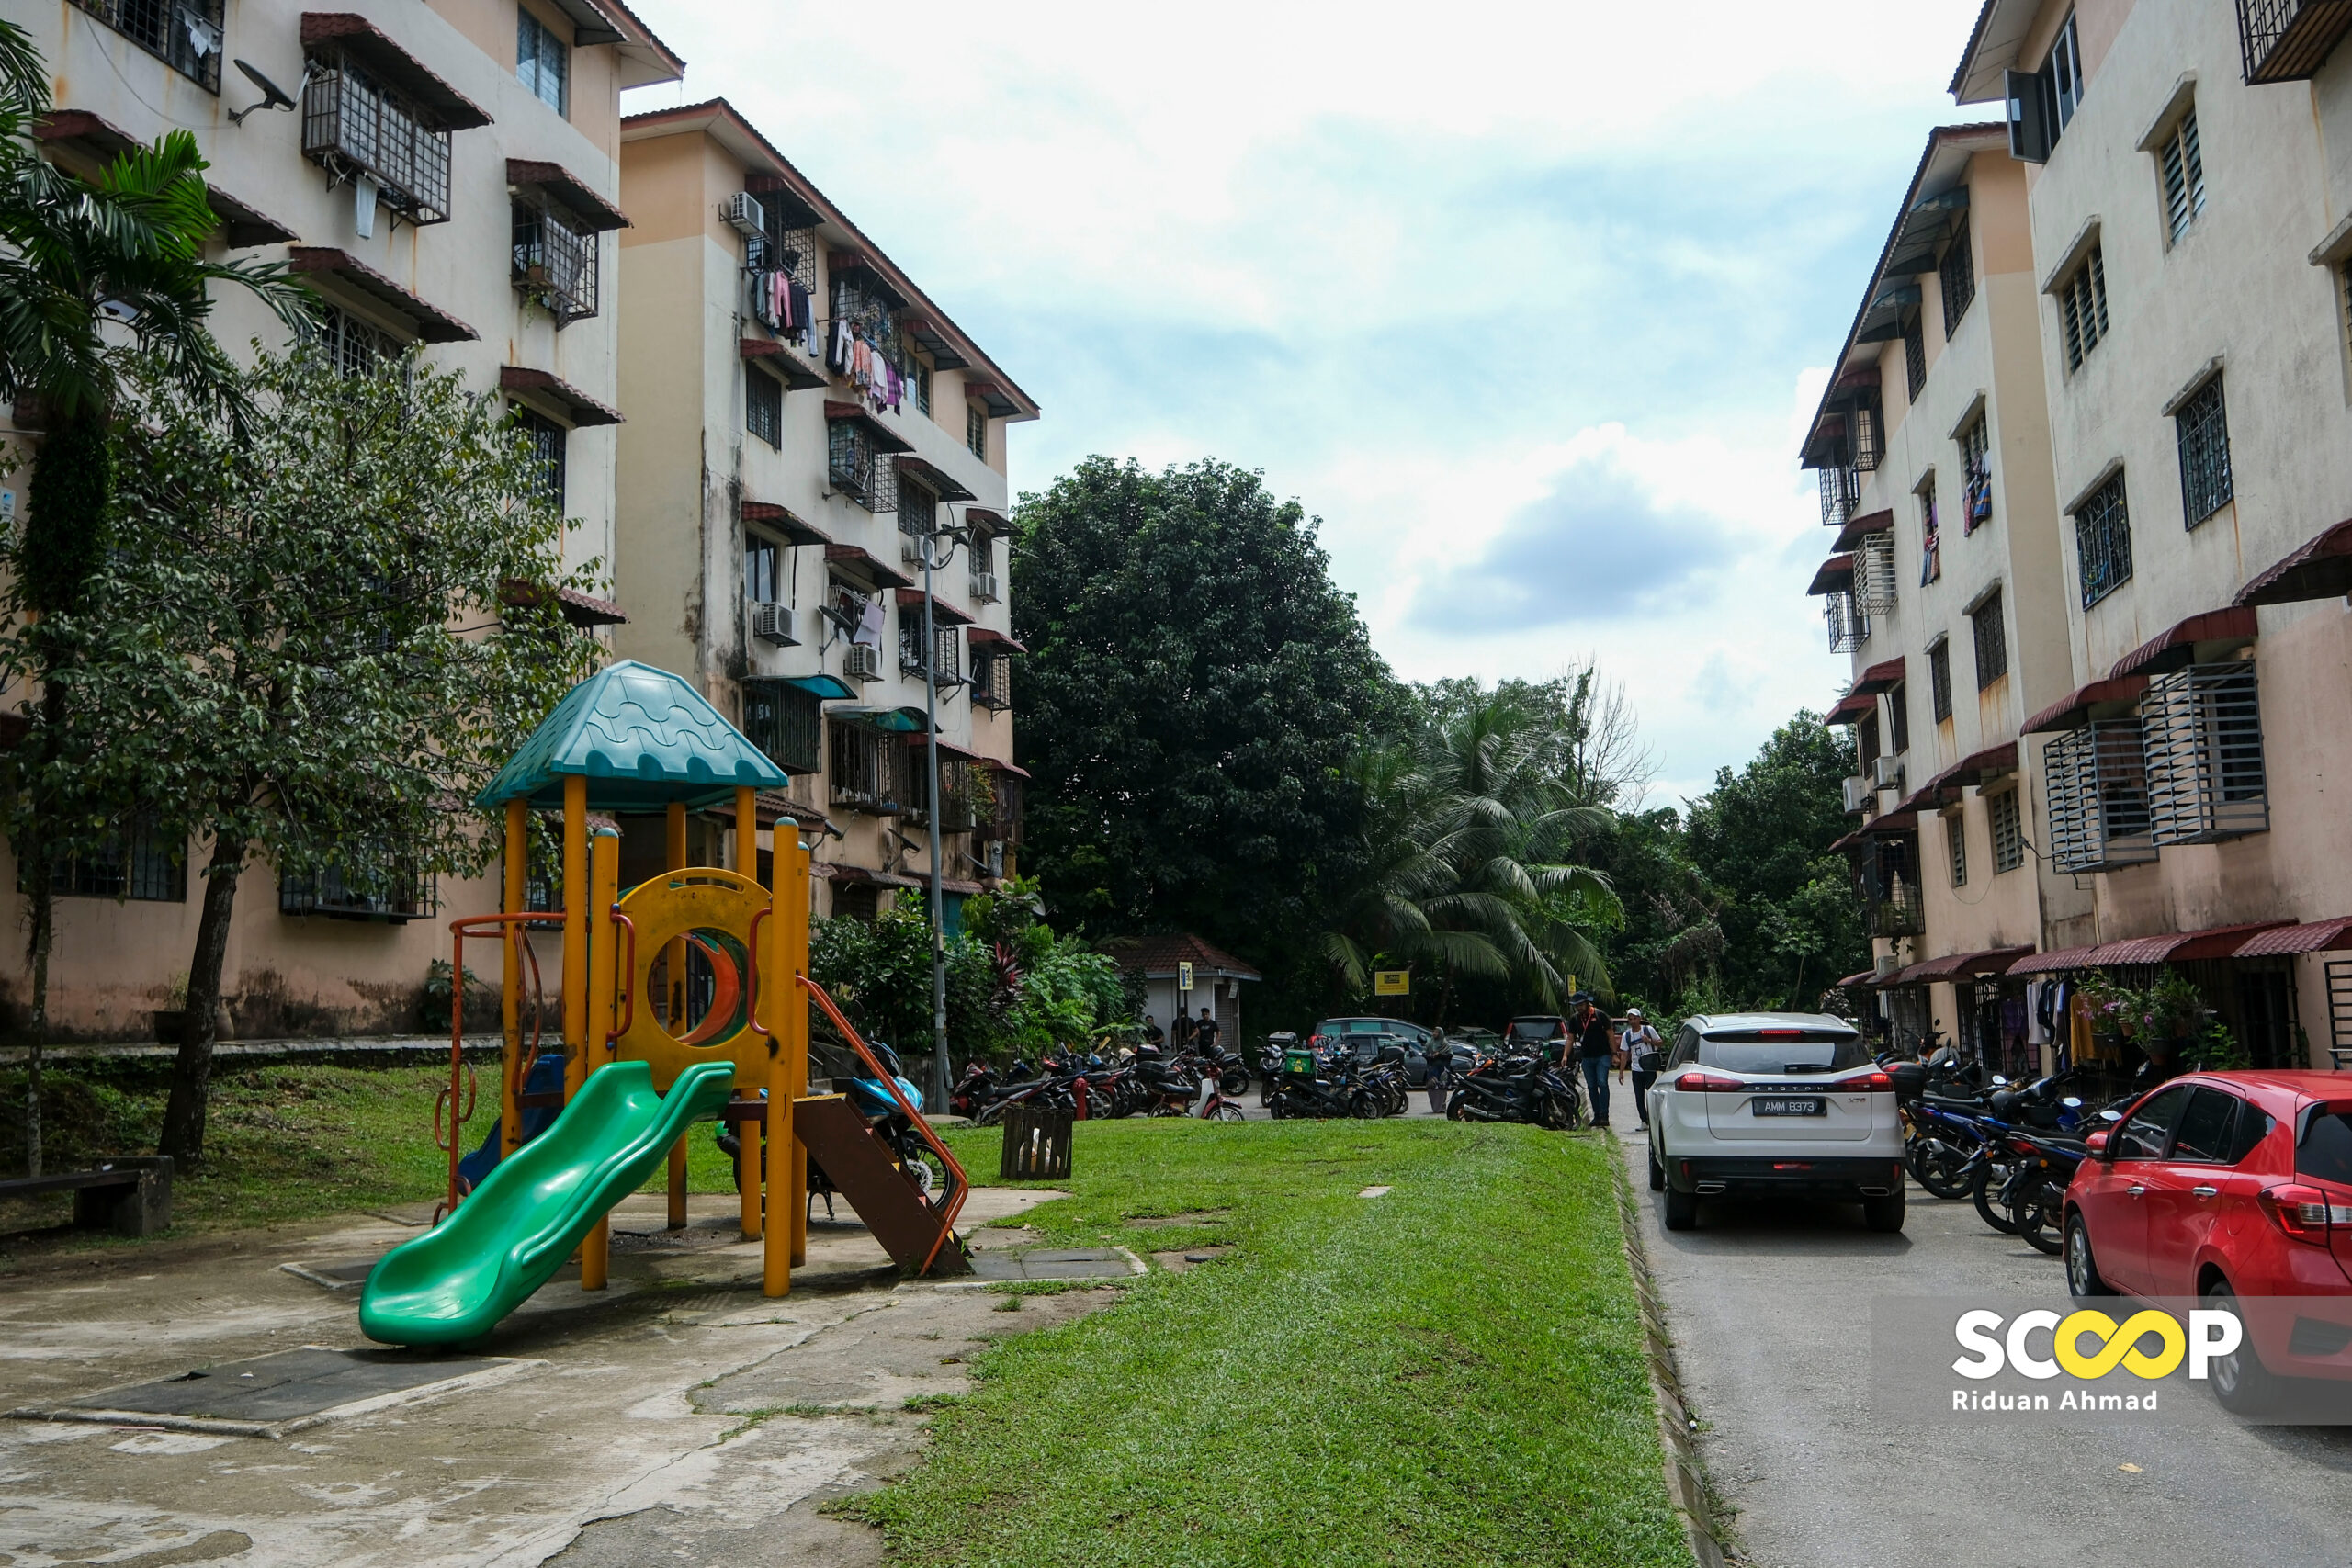 Less police presence around Zayn Rayyan’s residence but search for clues continues